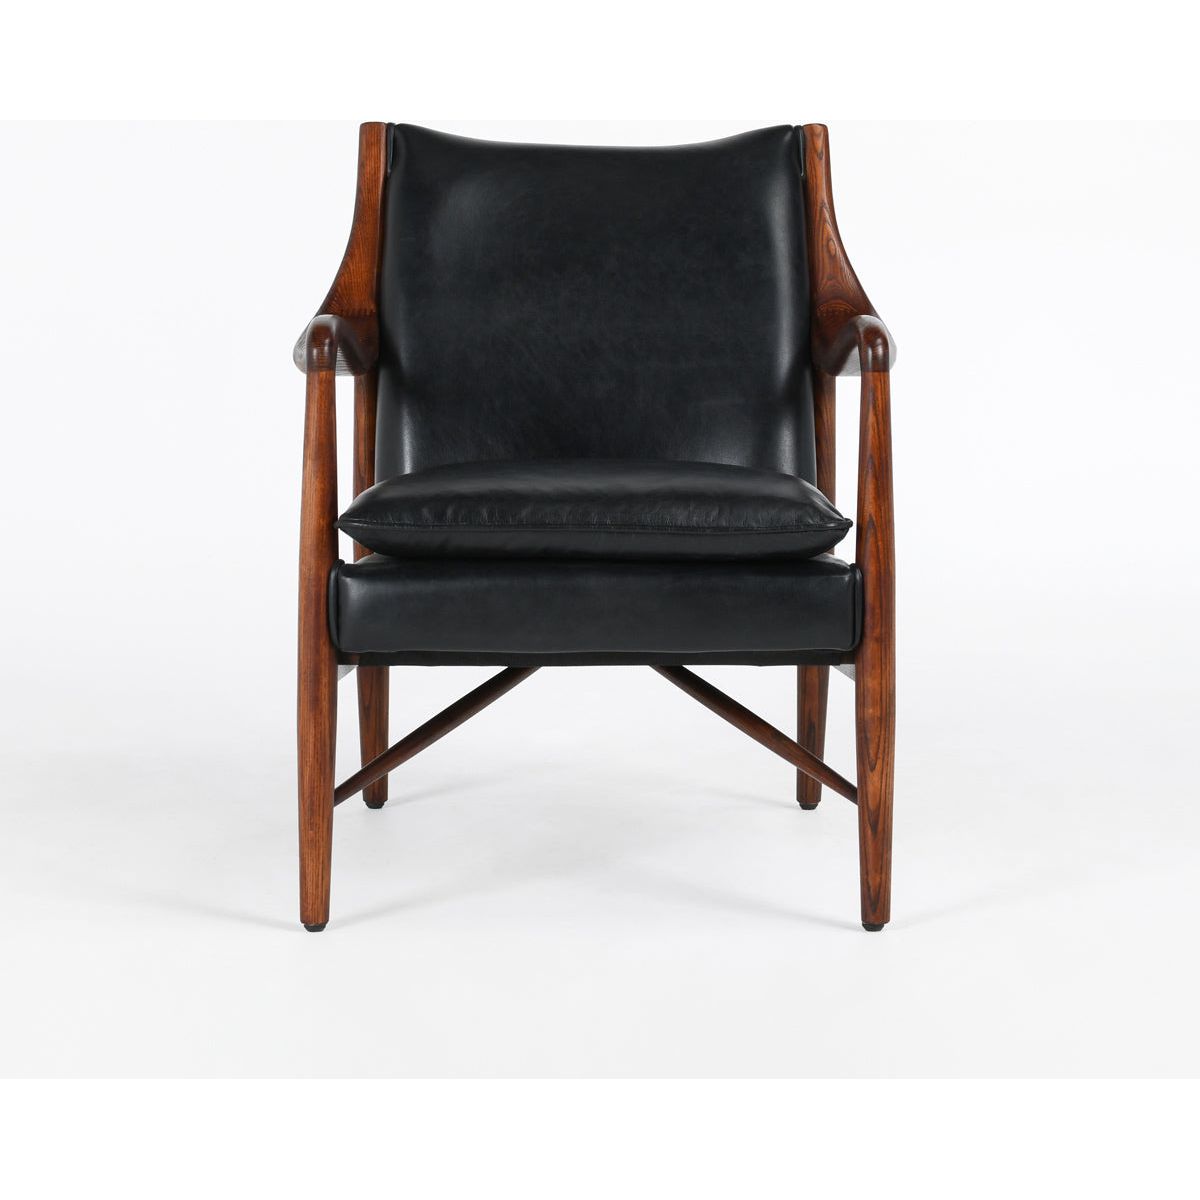 A Benson Mid-Century Leather Accent Chair with a polished walnut frame and genuine black leather upholstery. The chair features a high backrest, gently curved armrests, and angled legs, set against a plain white background.